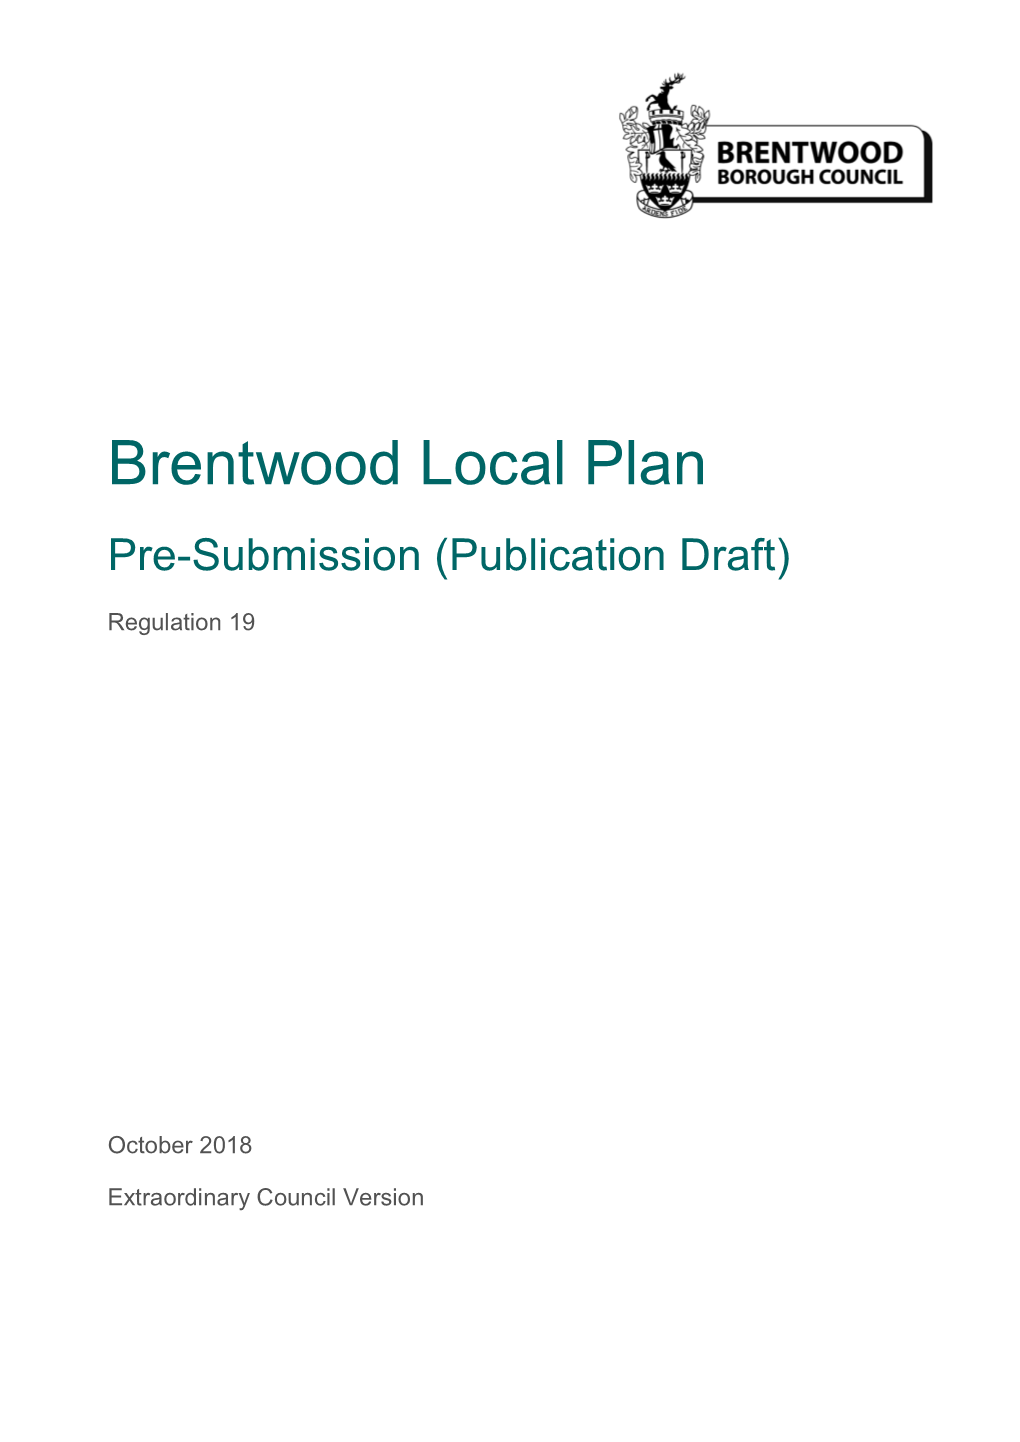 Pre-Submission Brentwood Local Plan (Regulation 19), October 2018